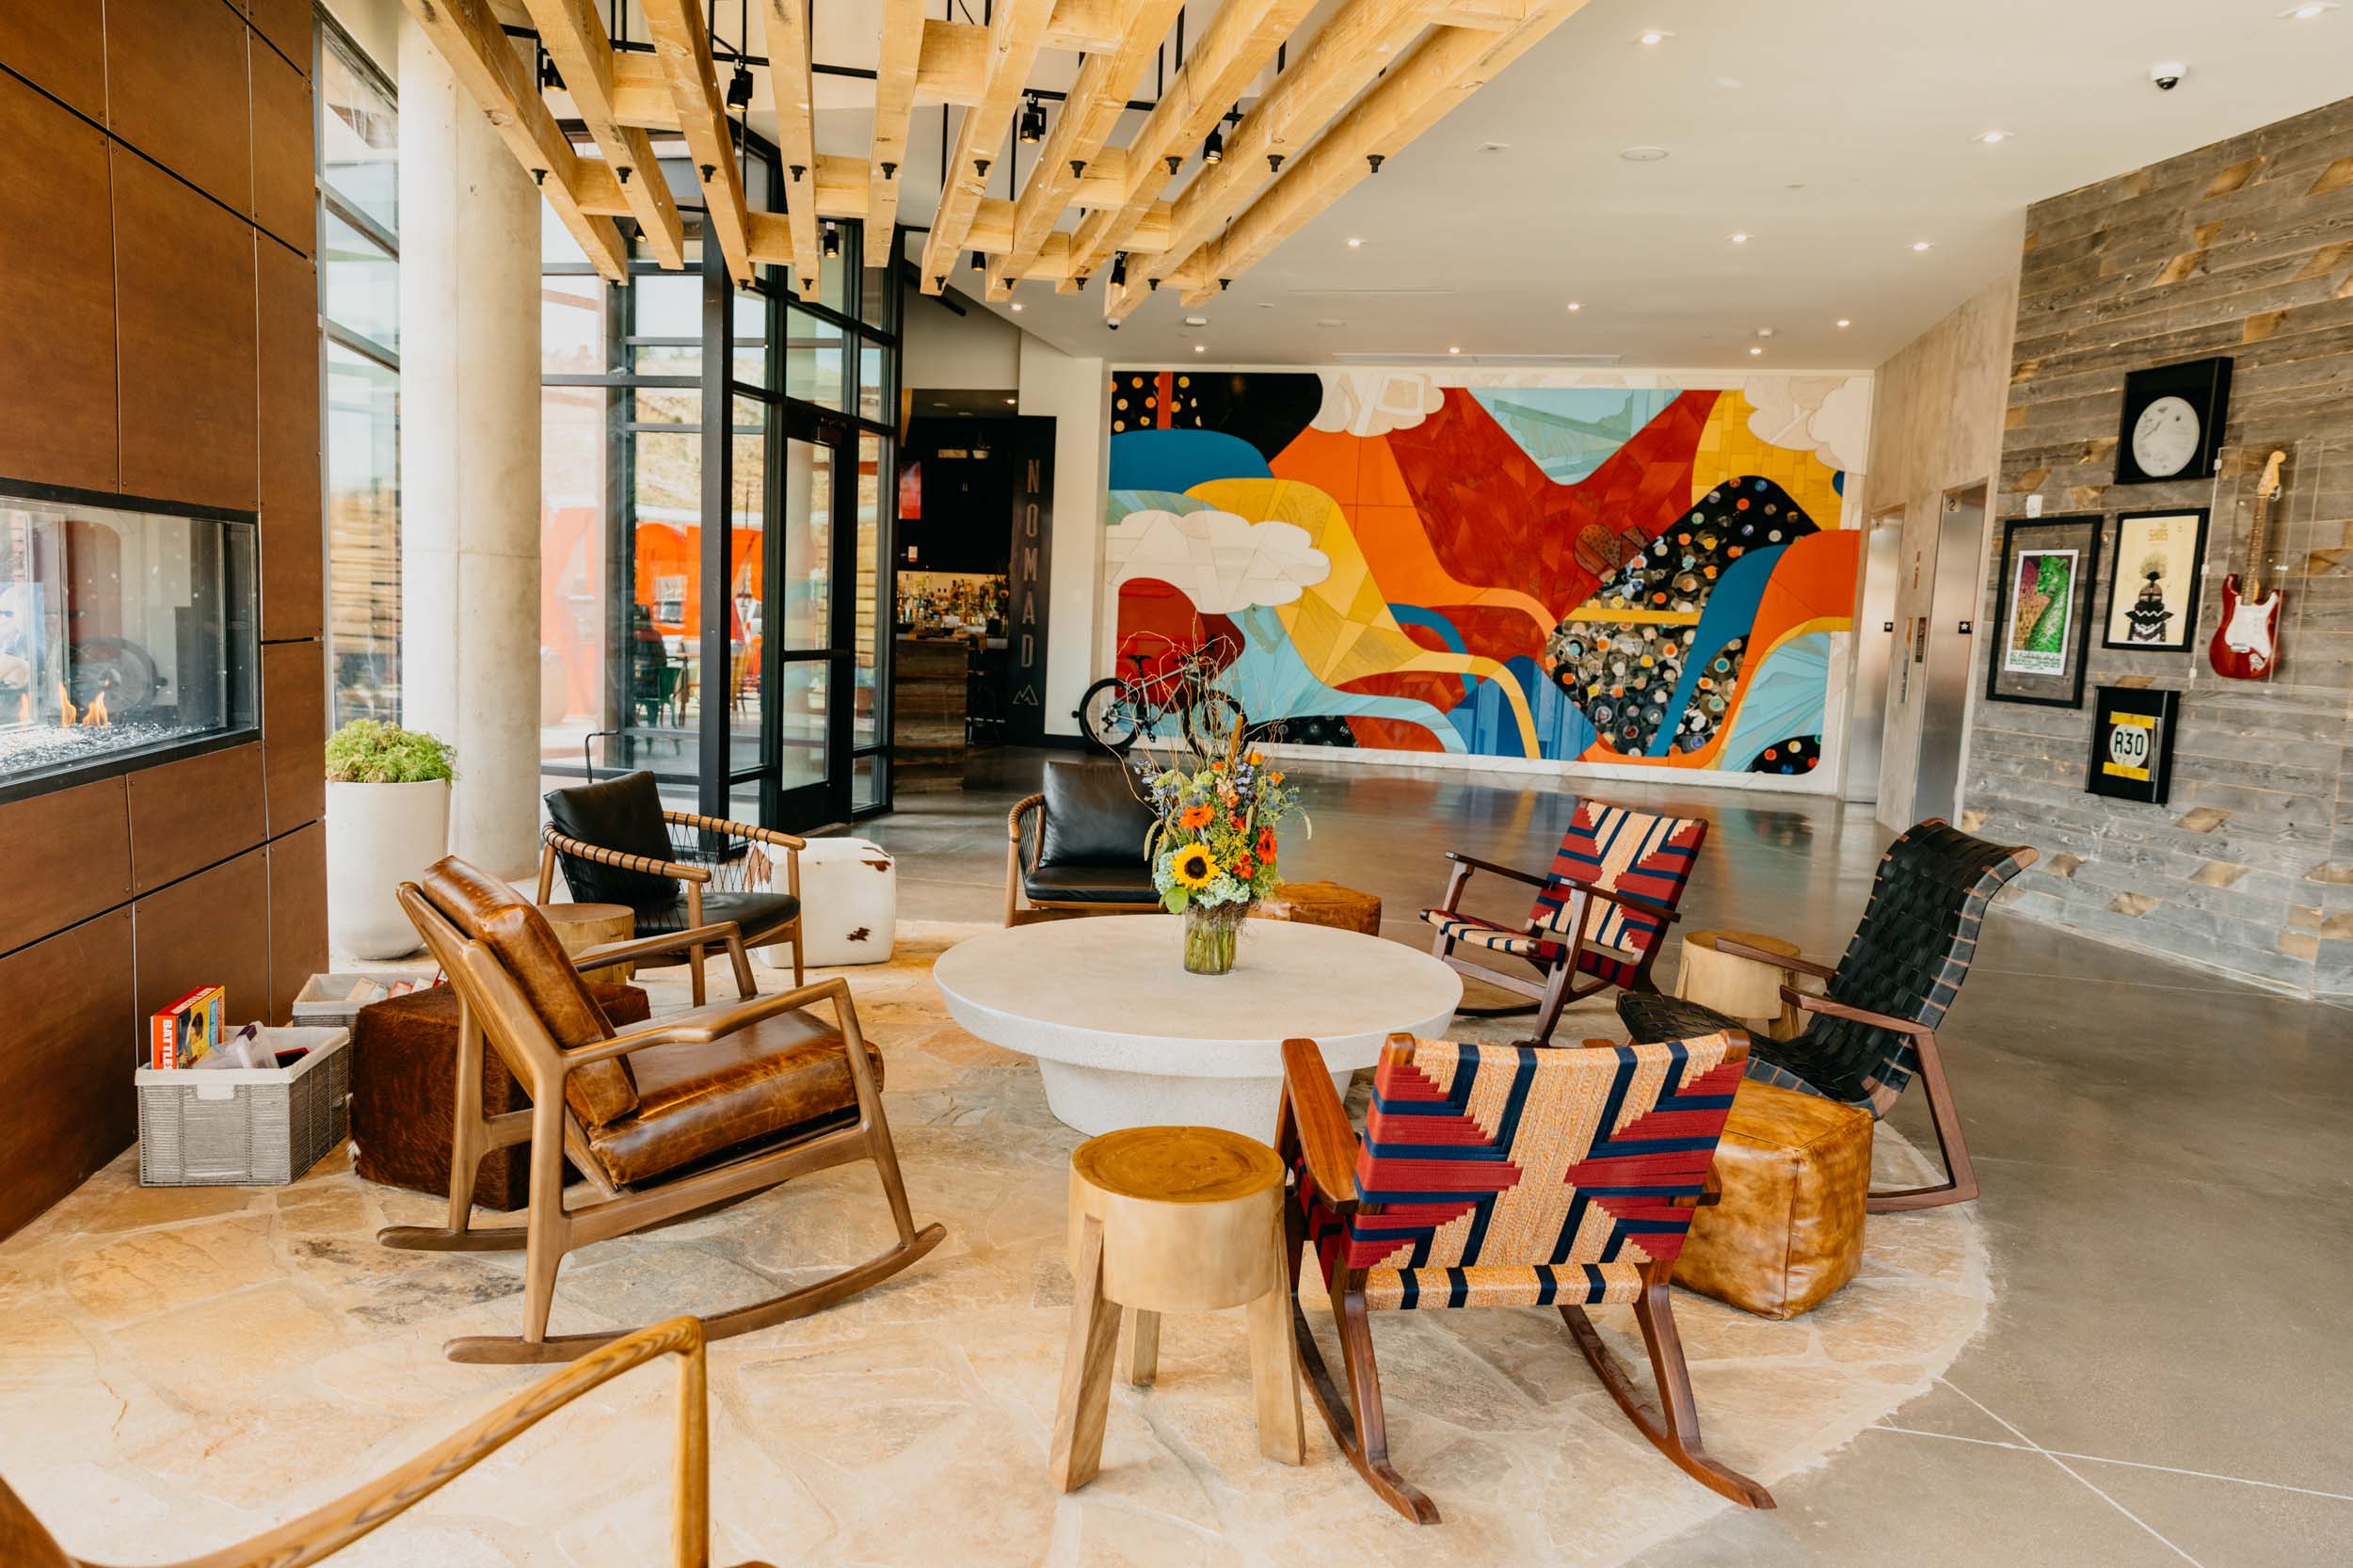 colorful lounge area with a circular table and tribal patterned chairs surrounding it